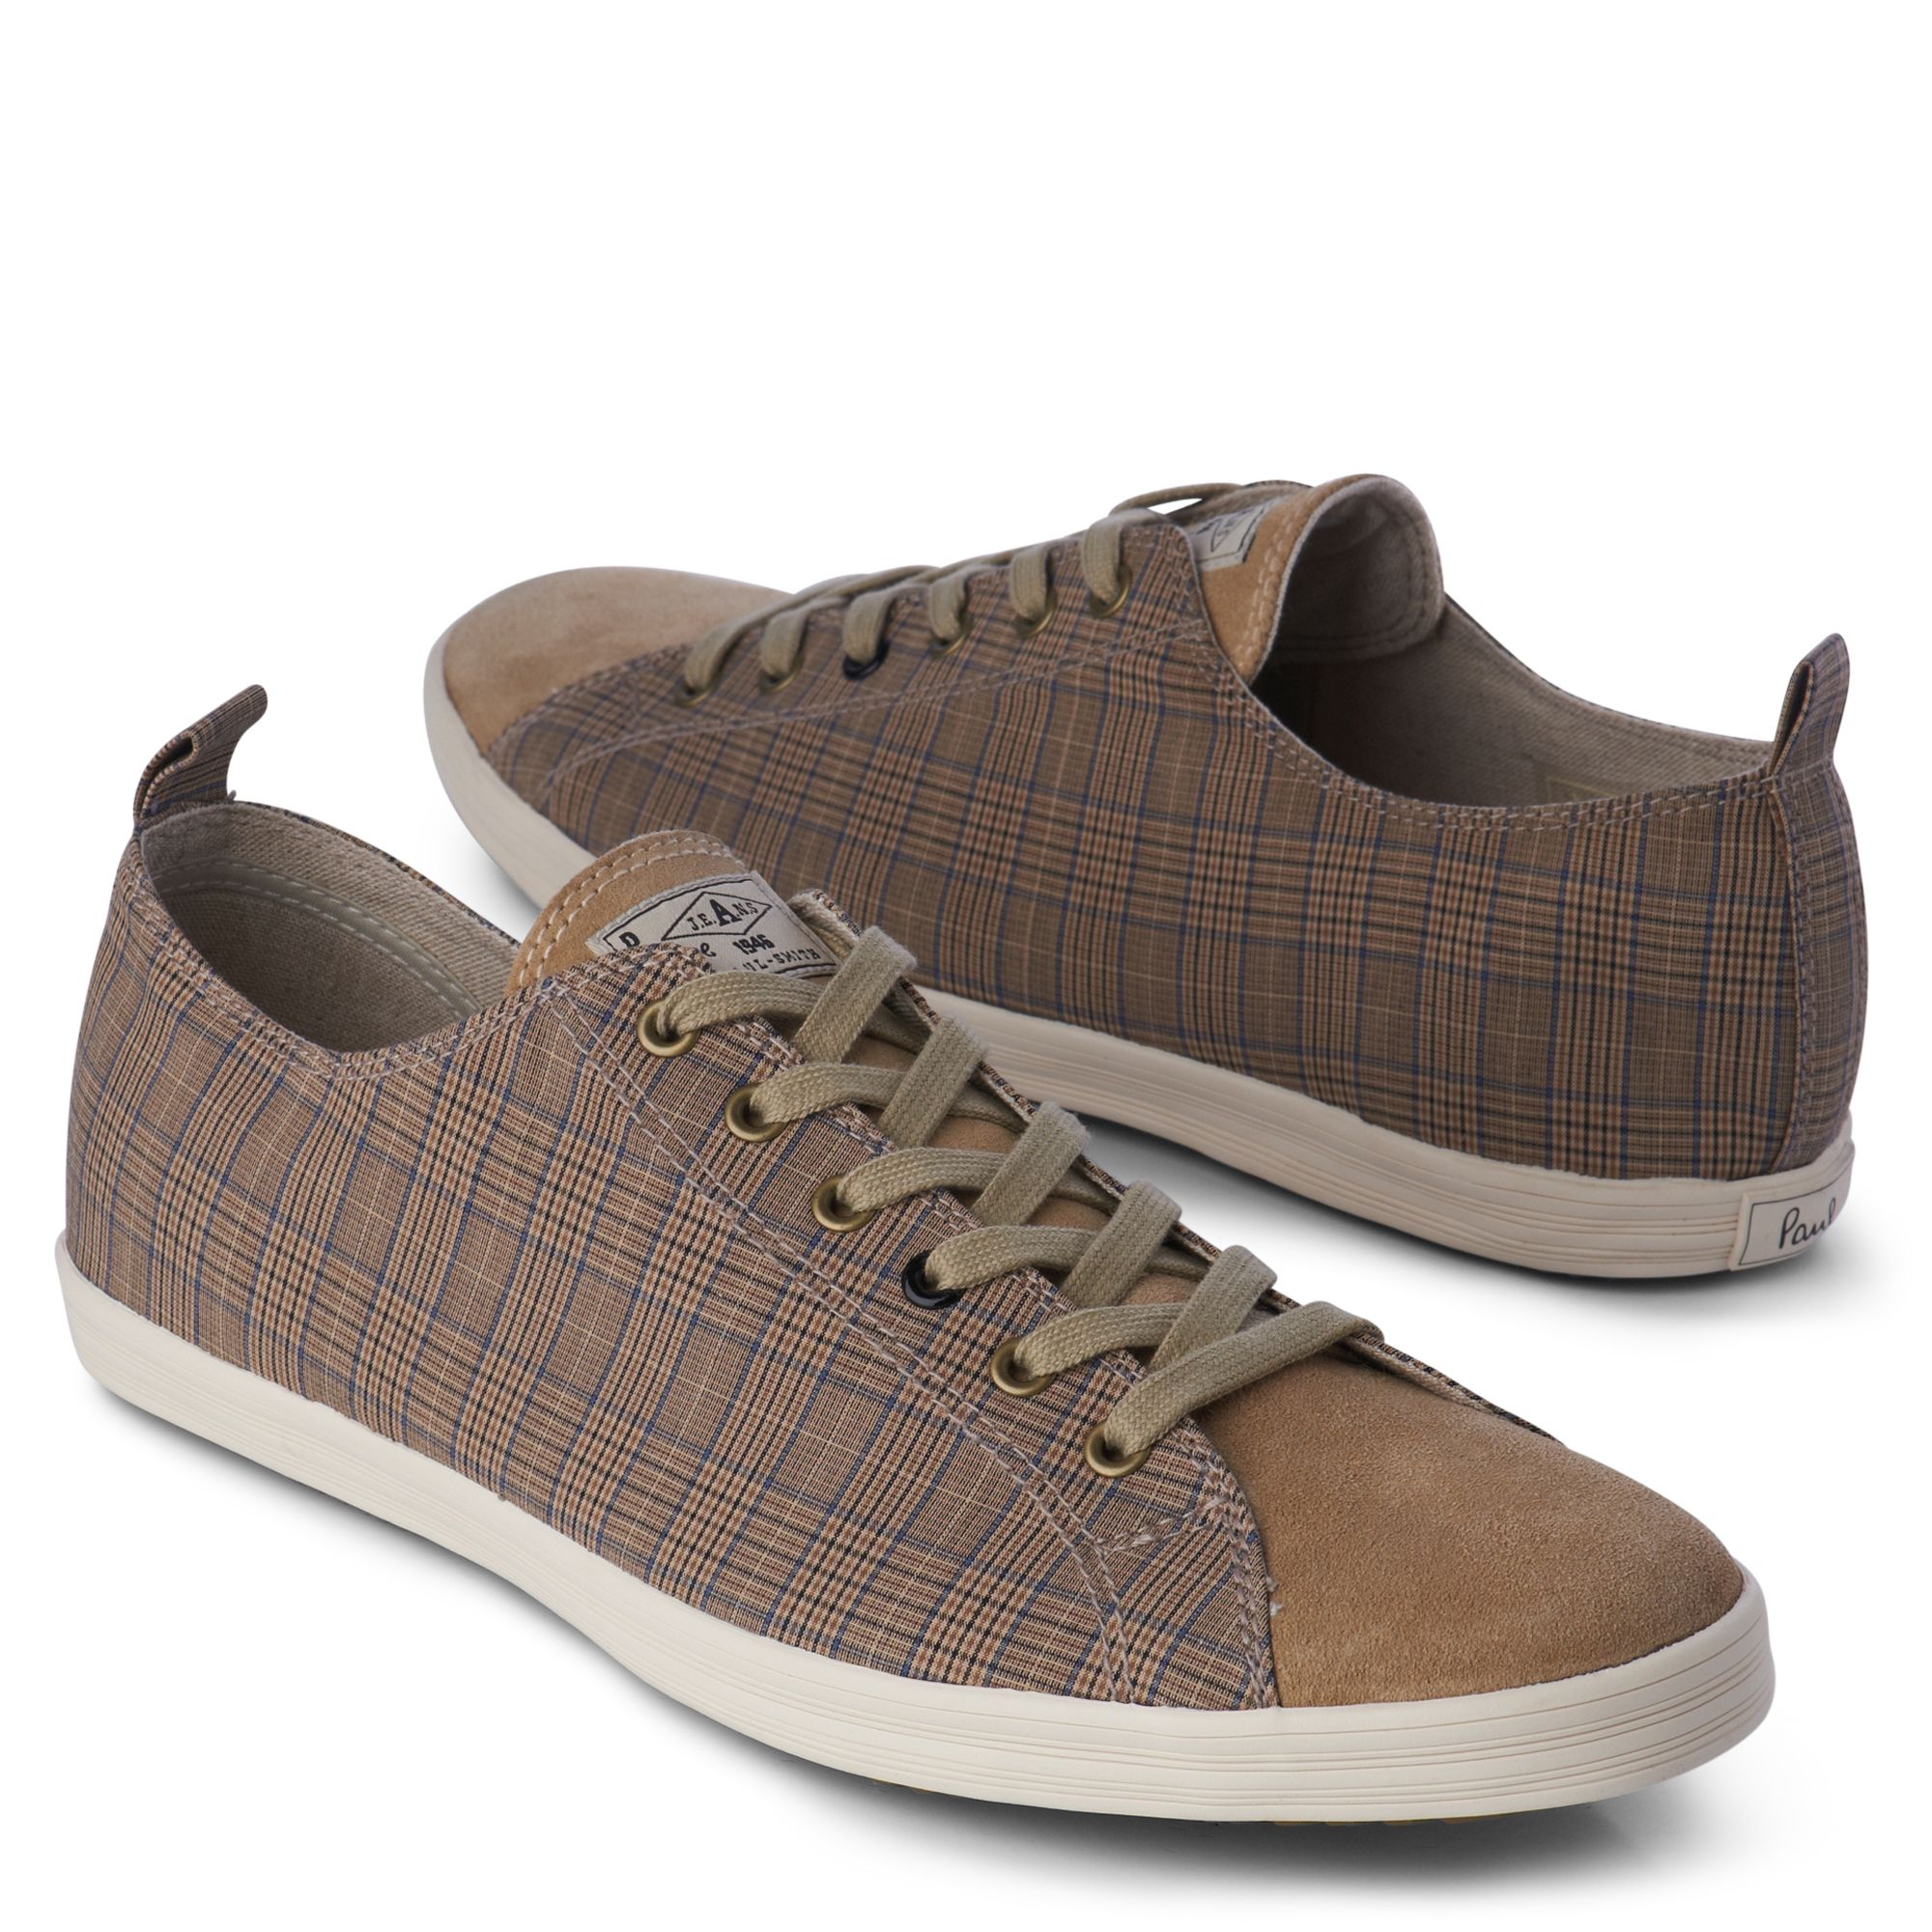 Paul Smith Musa Canvas Trainers Beige in Brown for Men - Lyst